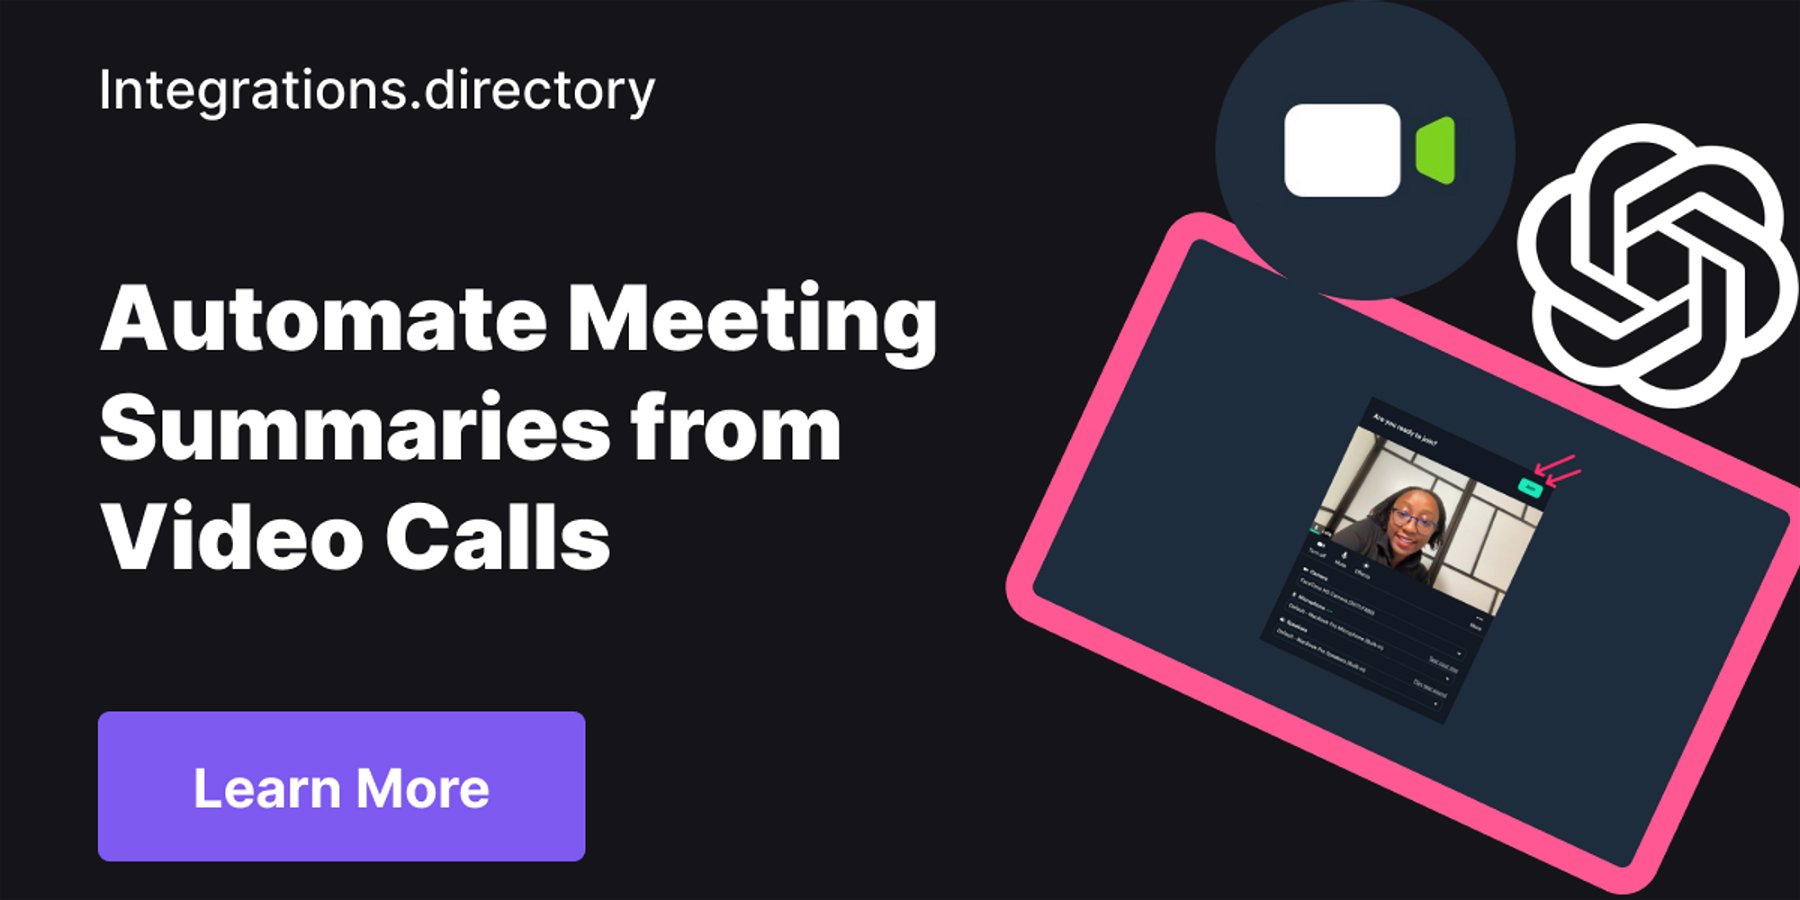 Automate Meeting Summaries from Video Calls